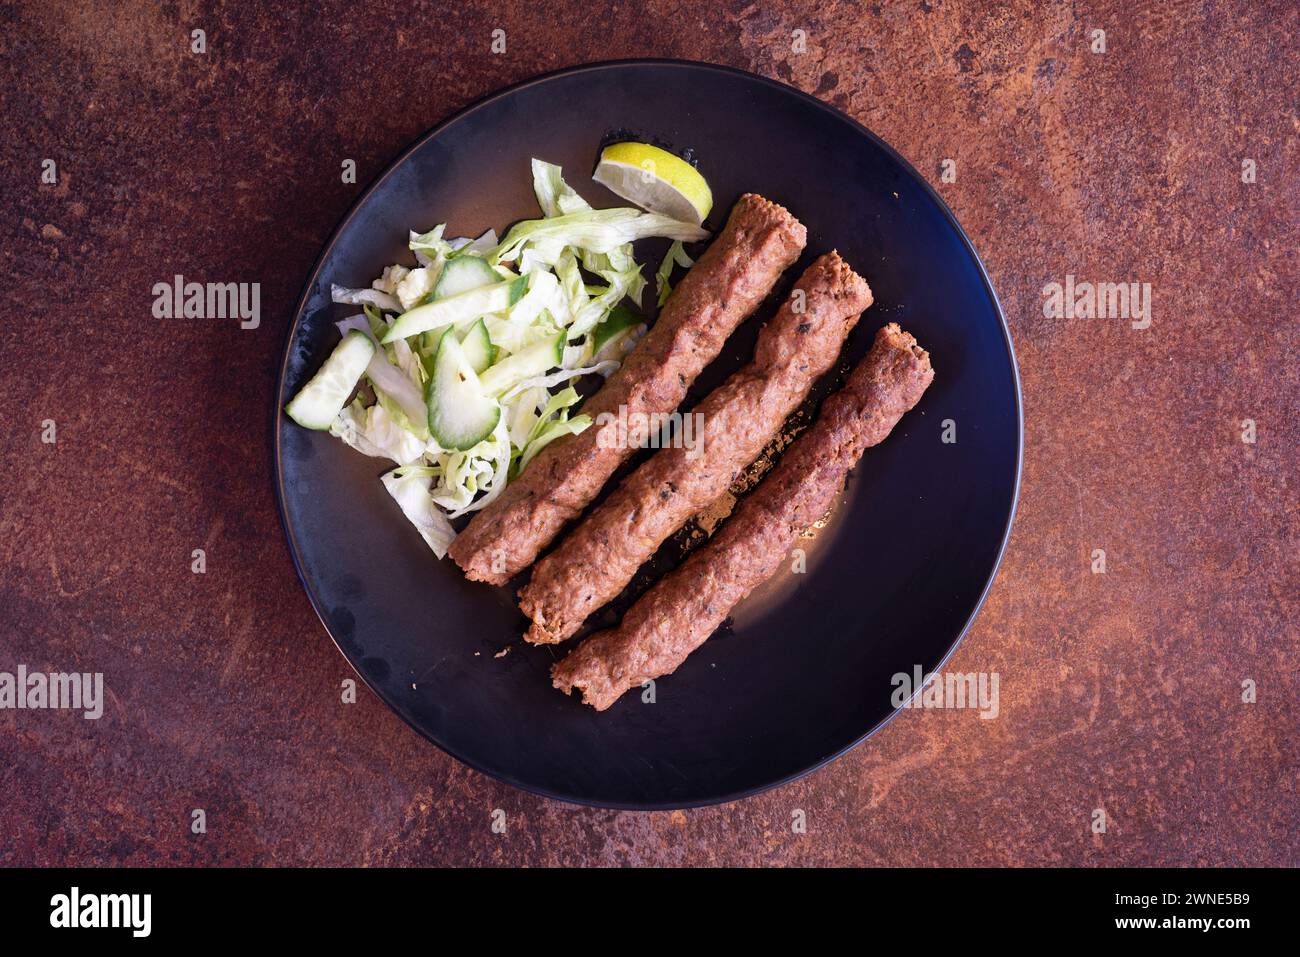 Lamb seekh kebabs spiced grilled meat and side salad Stock Photo